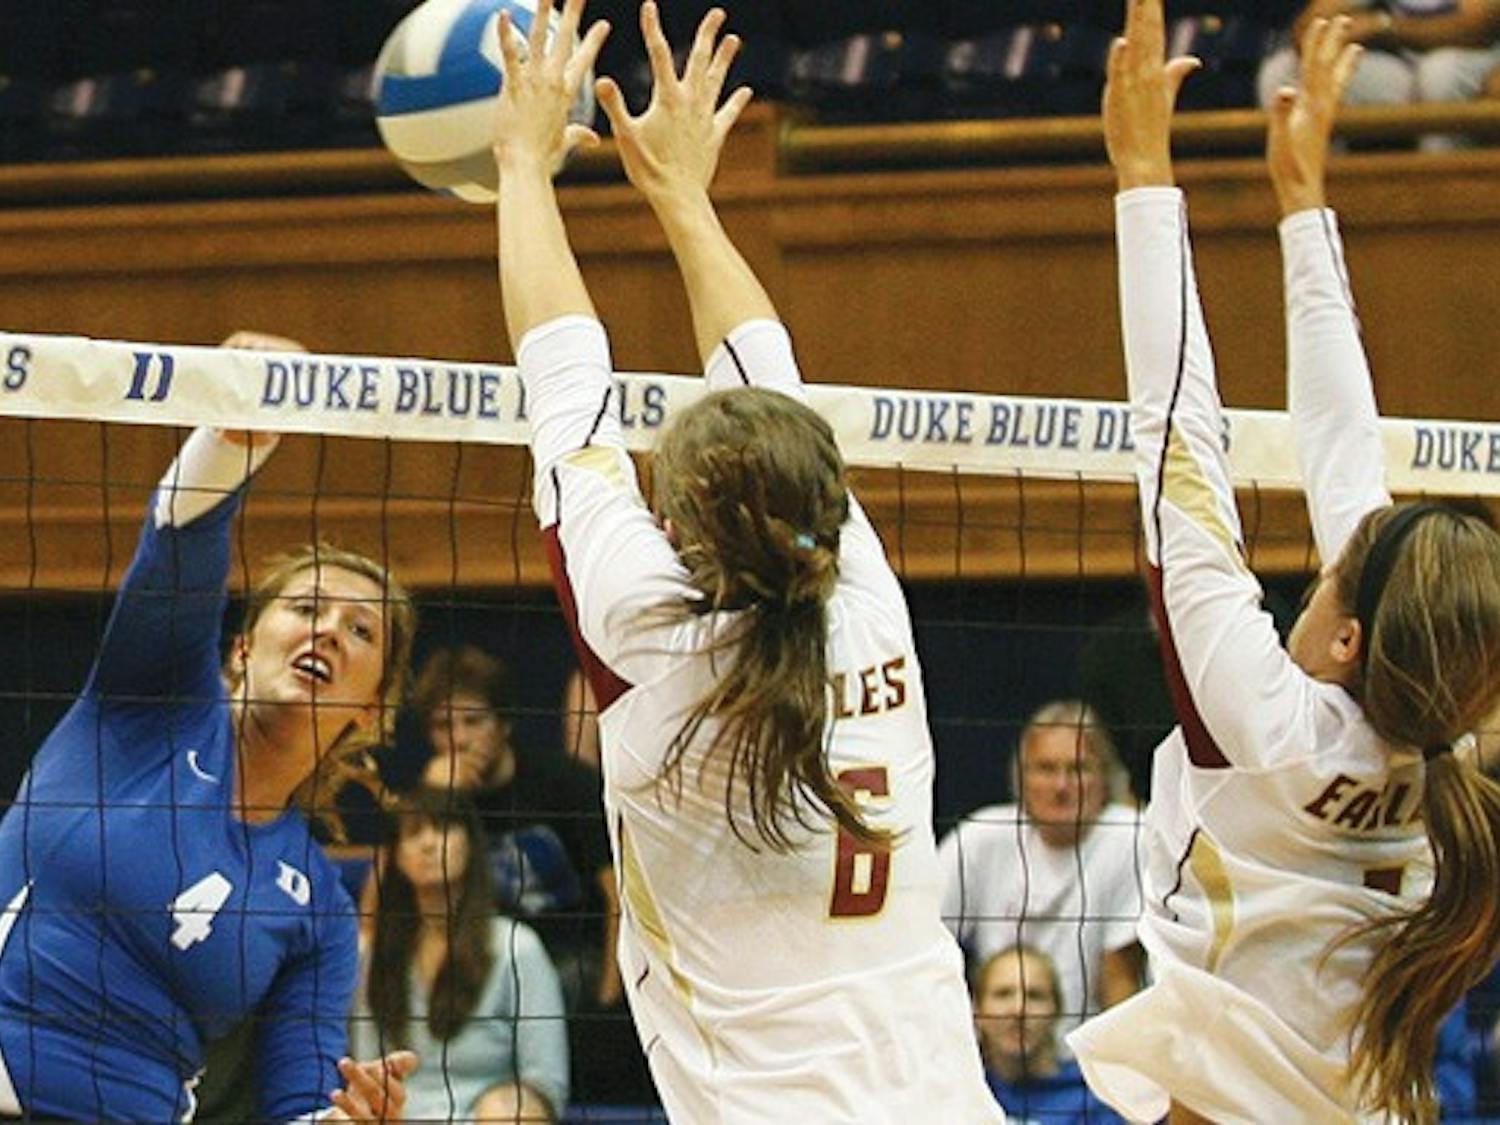 After sweeping Boston College Friday, Duke couldn’t keep its momentum going, losing to Maryland Sunday.